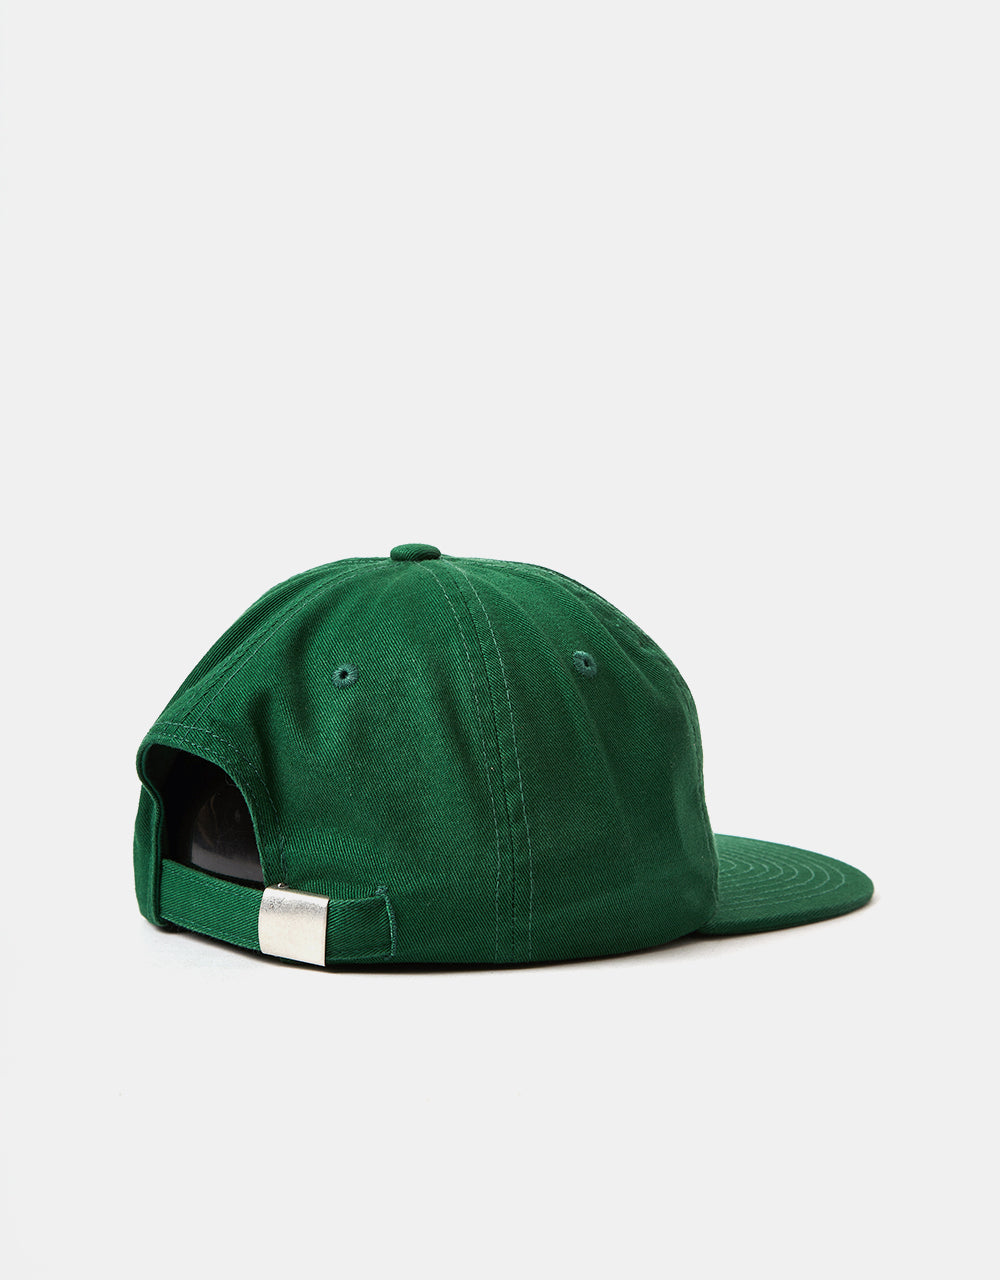 Route One Fruit One Unstructured 6 Panel Cap - Forest Green